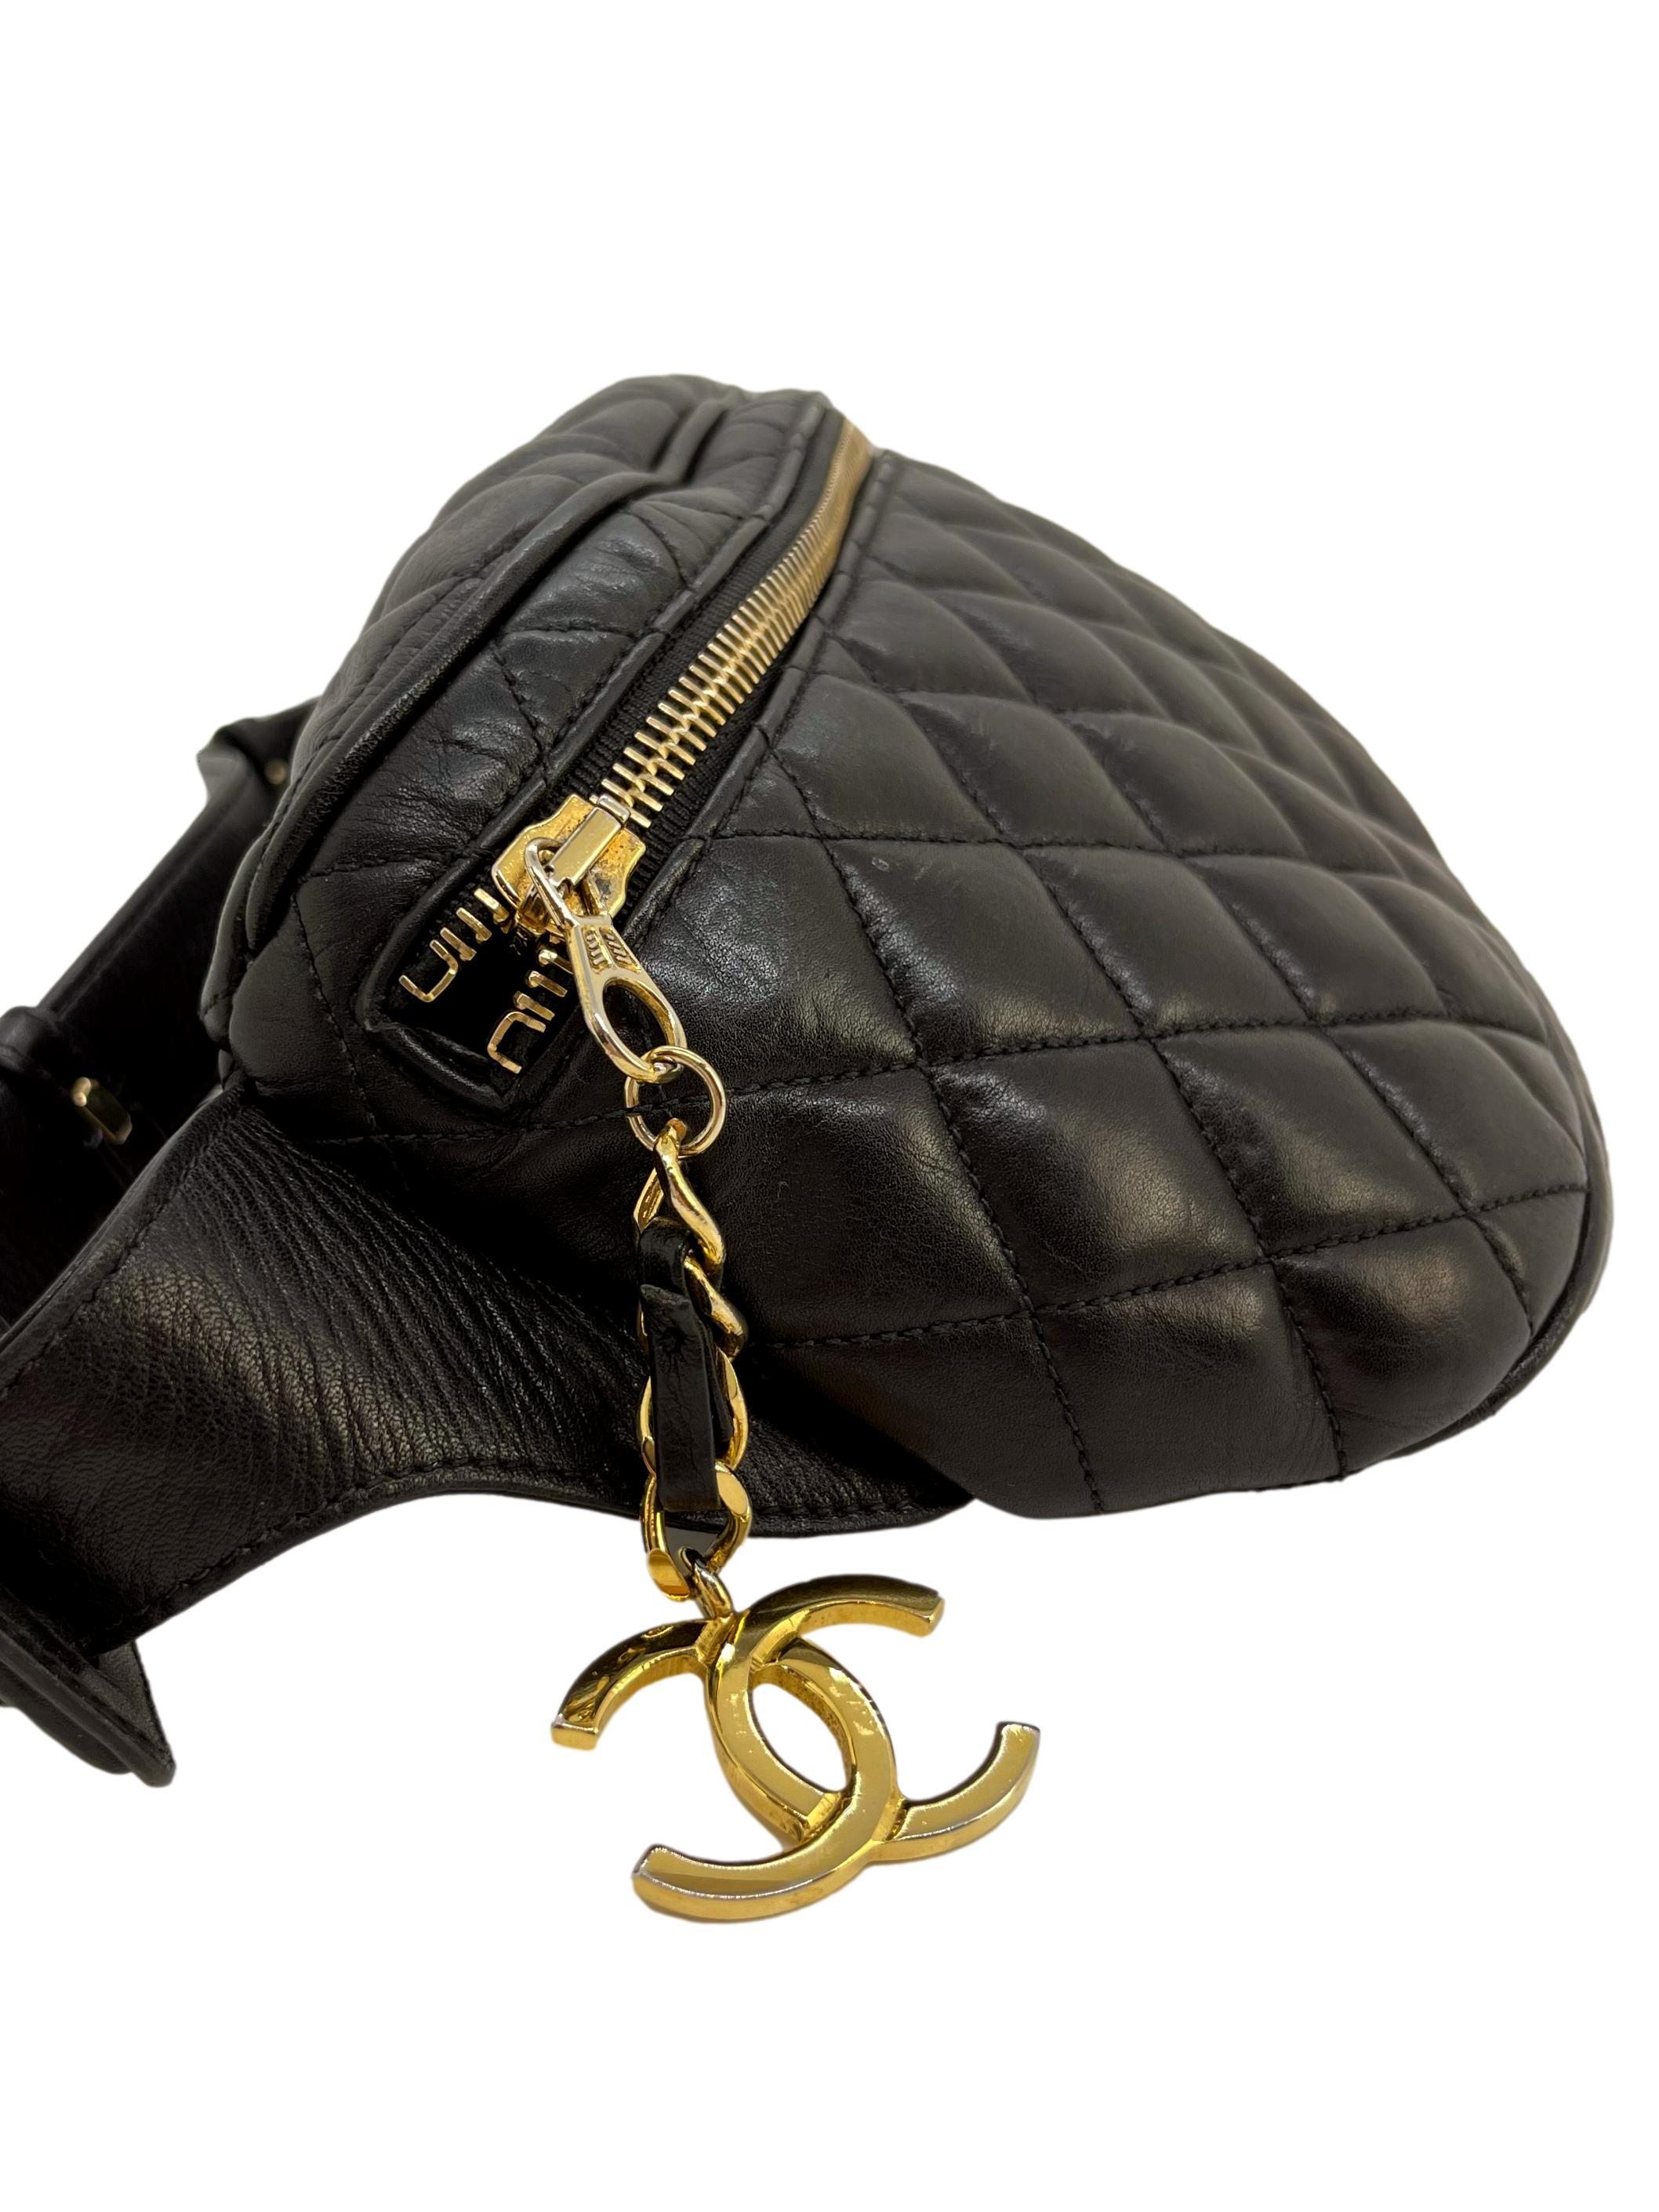 Chanel Quilted Lambskin Waist Belt Bum Bag with Gold Hardware, 1985. 2